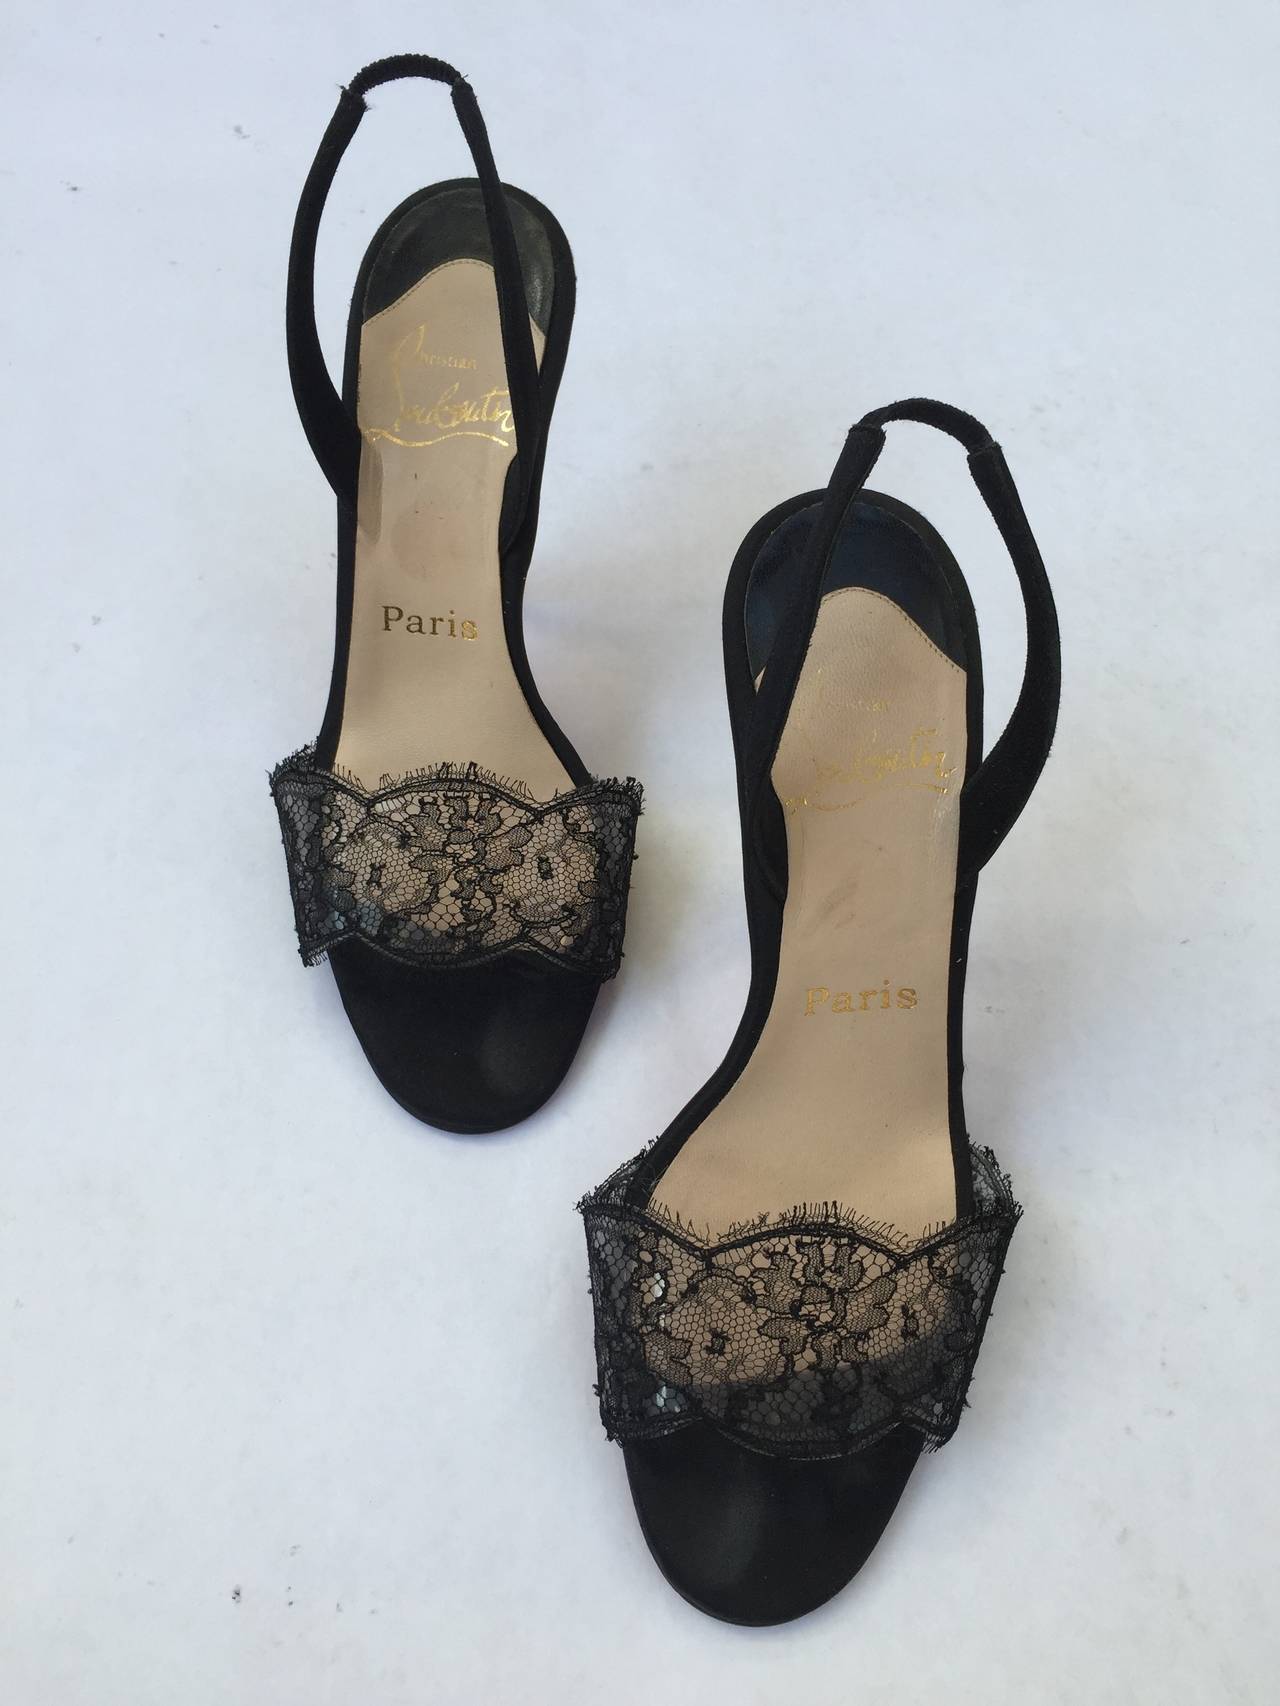 Women's Christian Louboutin black heels with lace trim size 5.5. For Sale